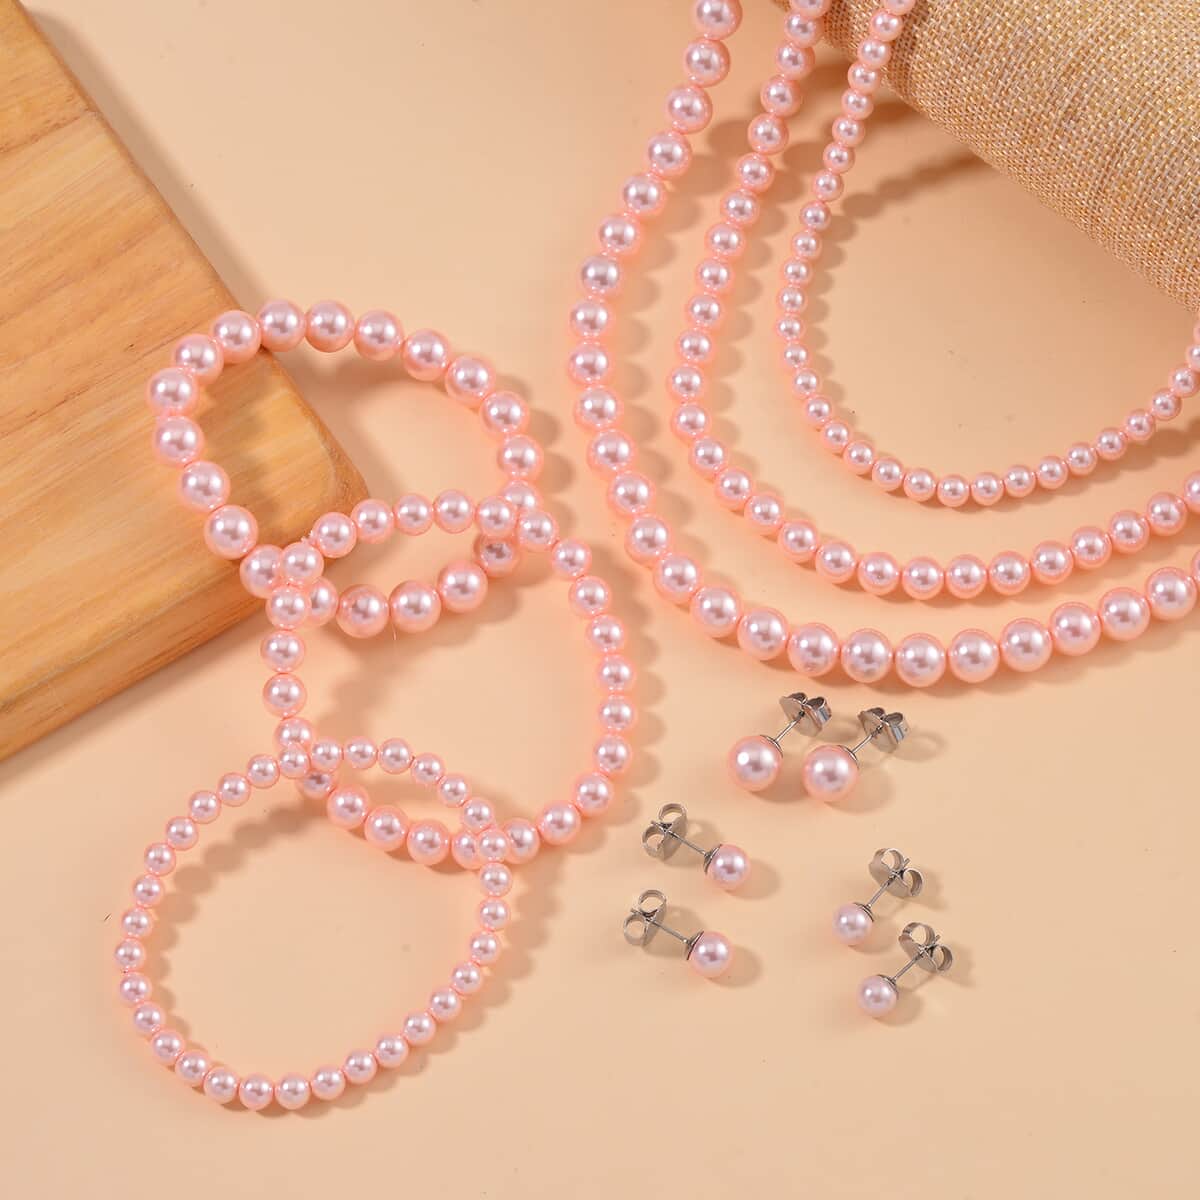 Set with Bow Ribbon Ivory Packaging 9pcs Set Peach Color Constituted Shell Pearl Stretch Bracelet, Earrings and Necklace 20-22 Inches in Stainless Steel image number 1